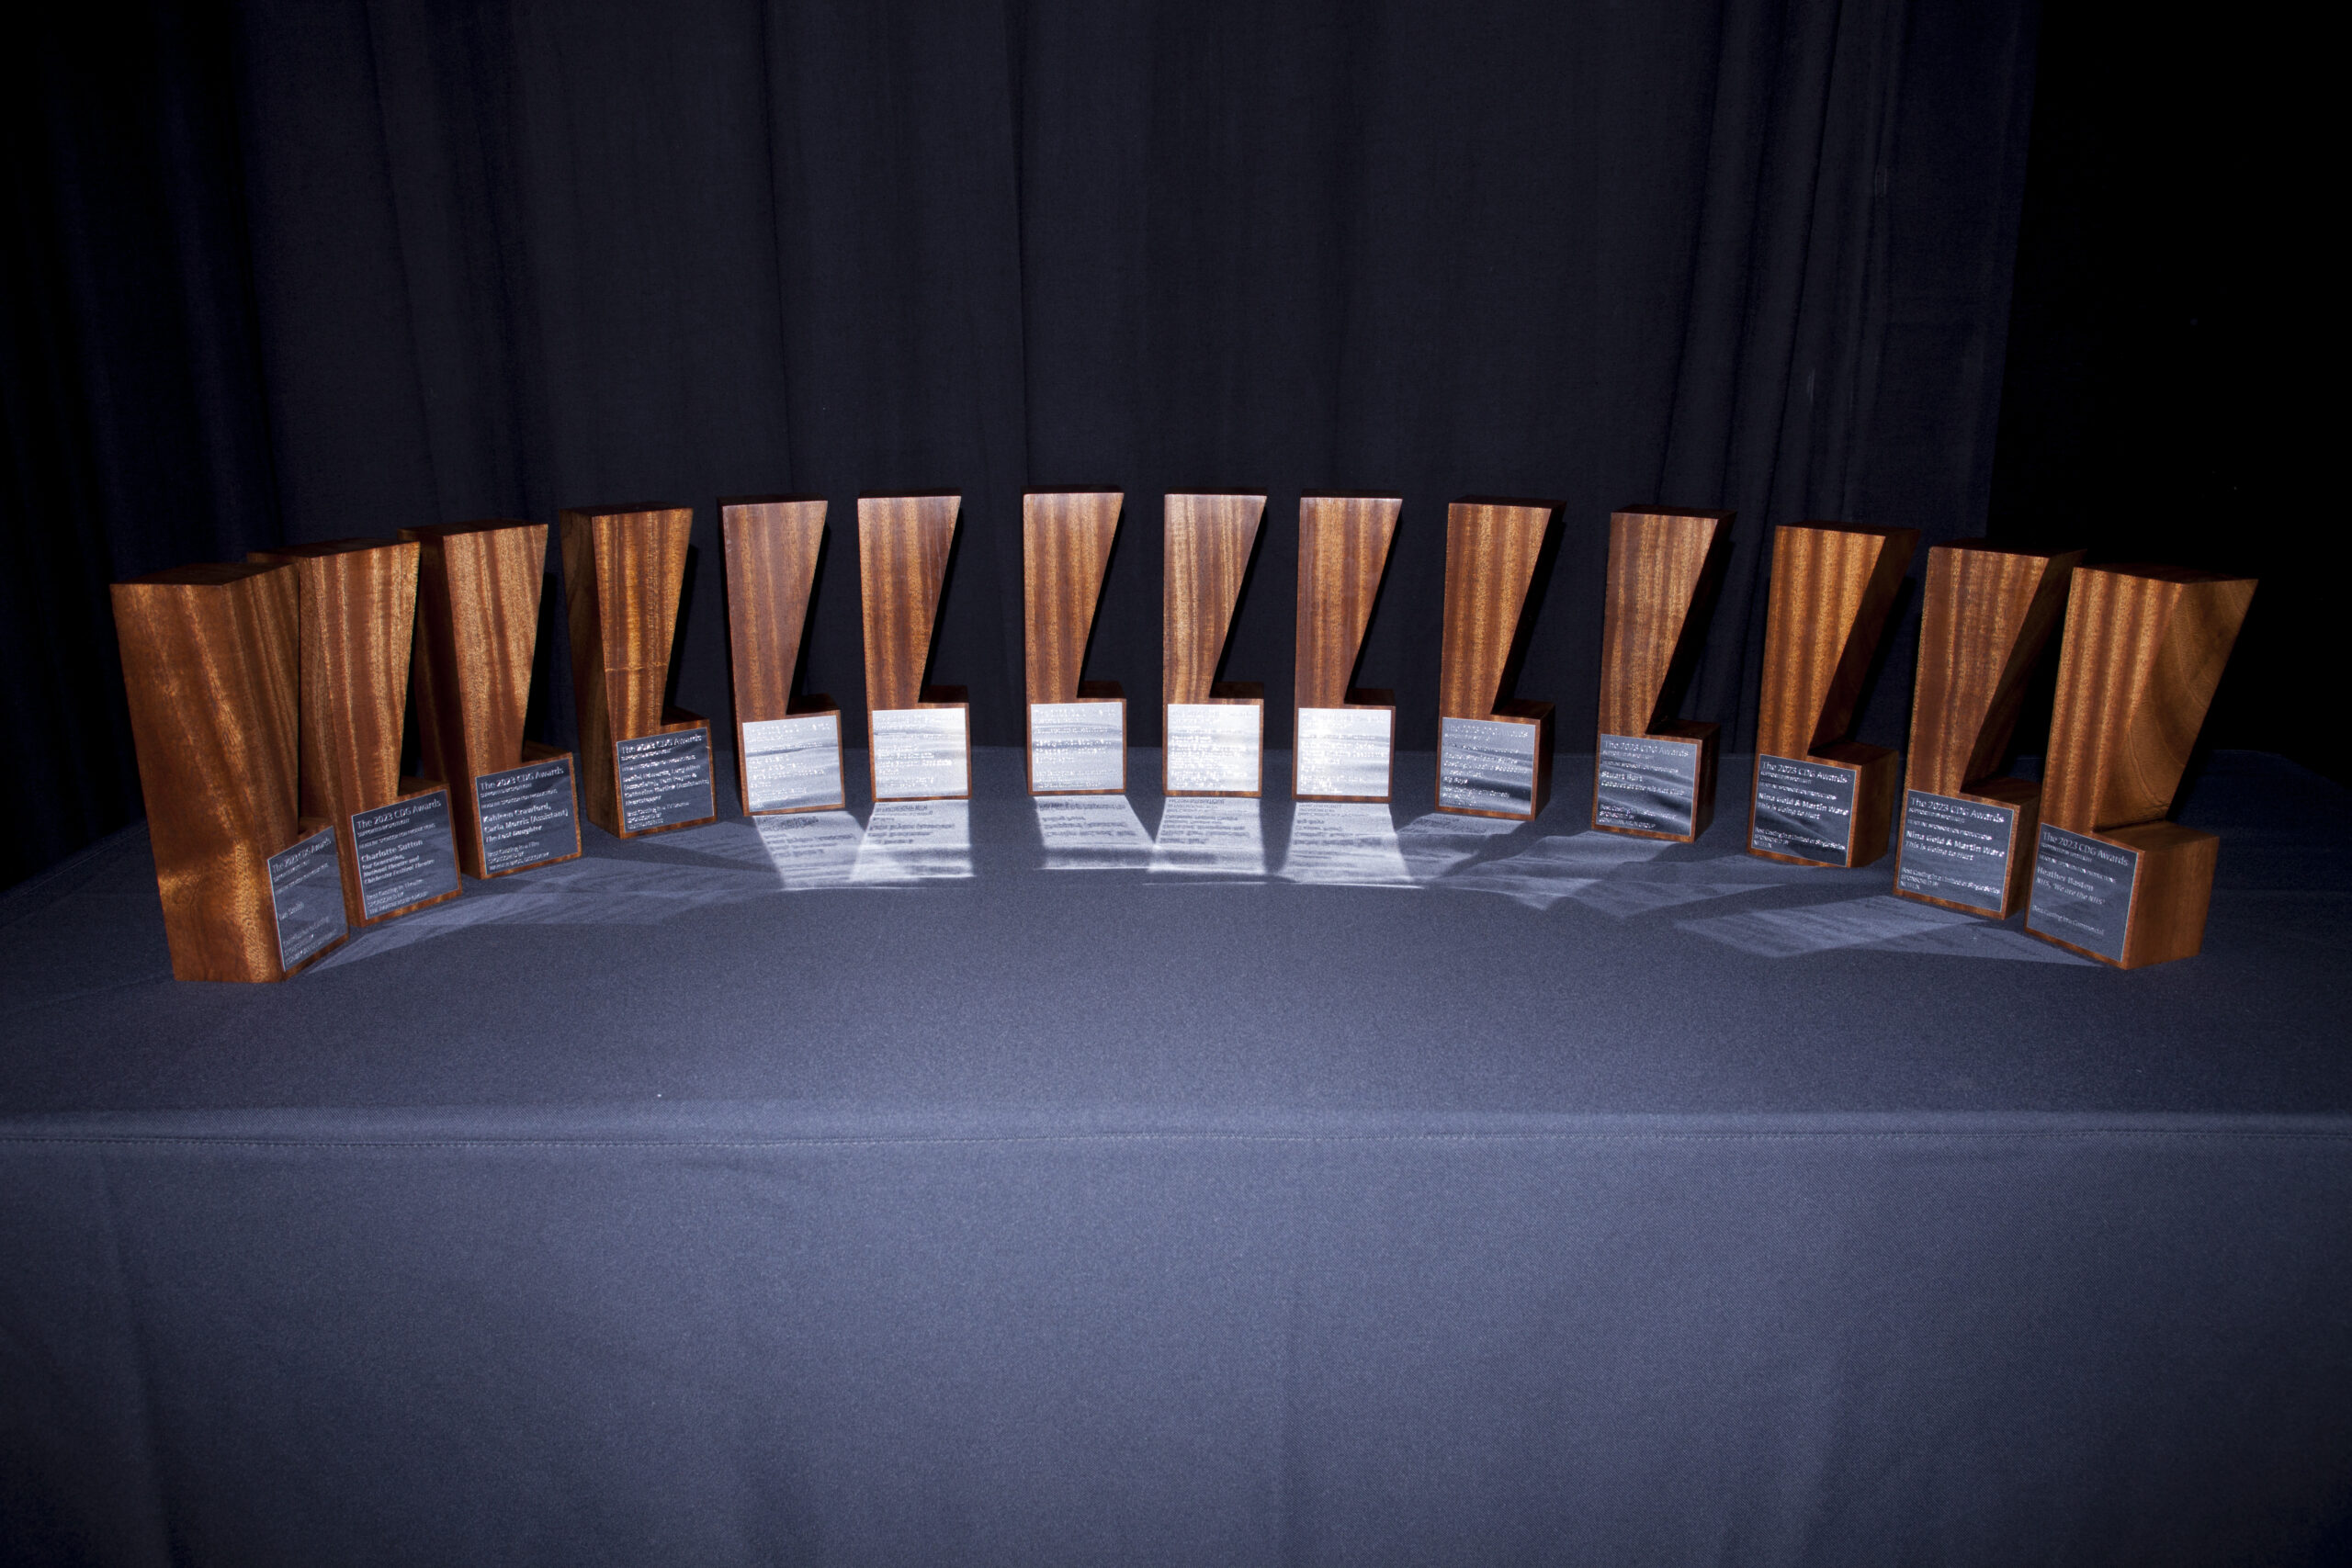 CDG Casting Award trophies displayed on a table